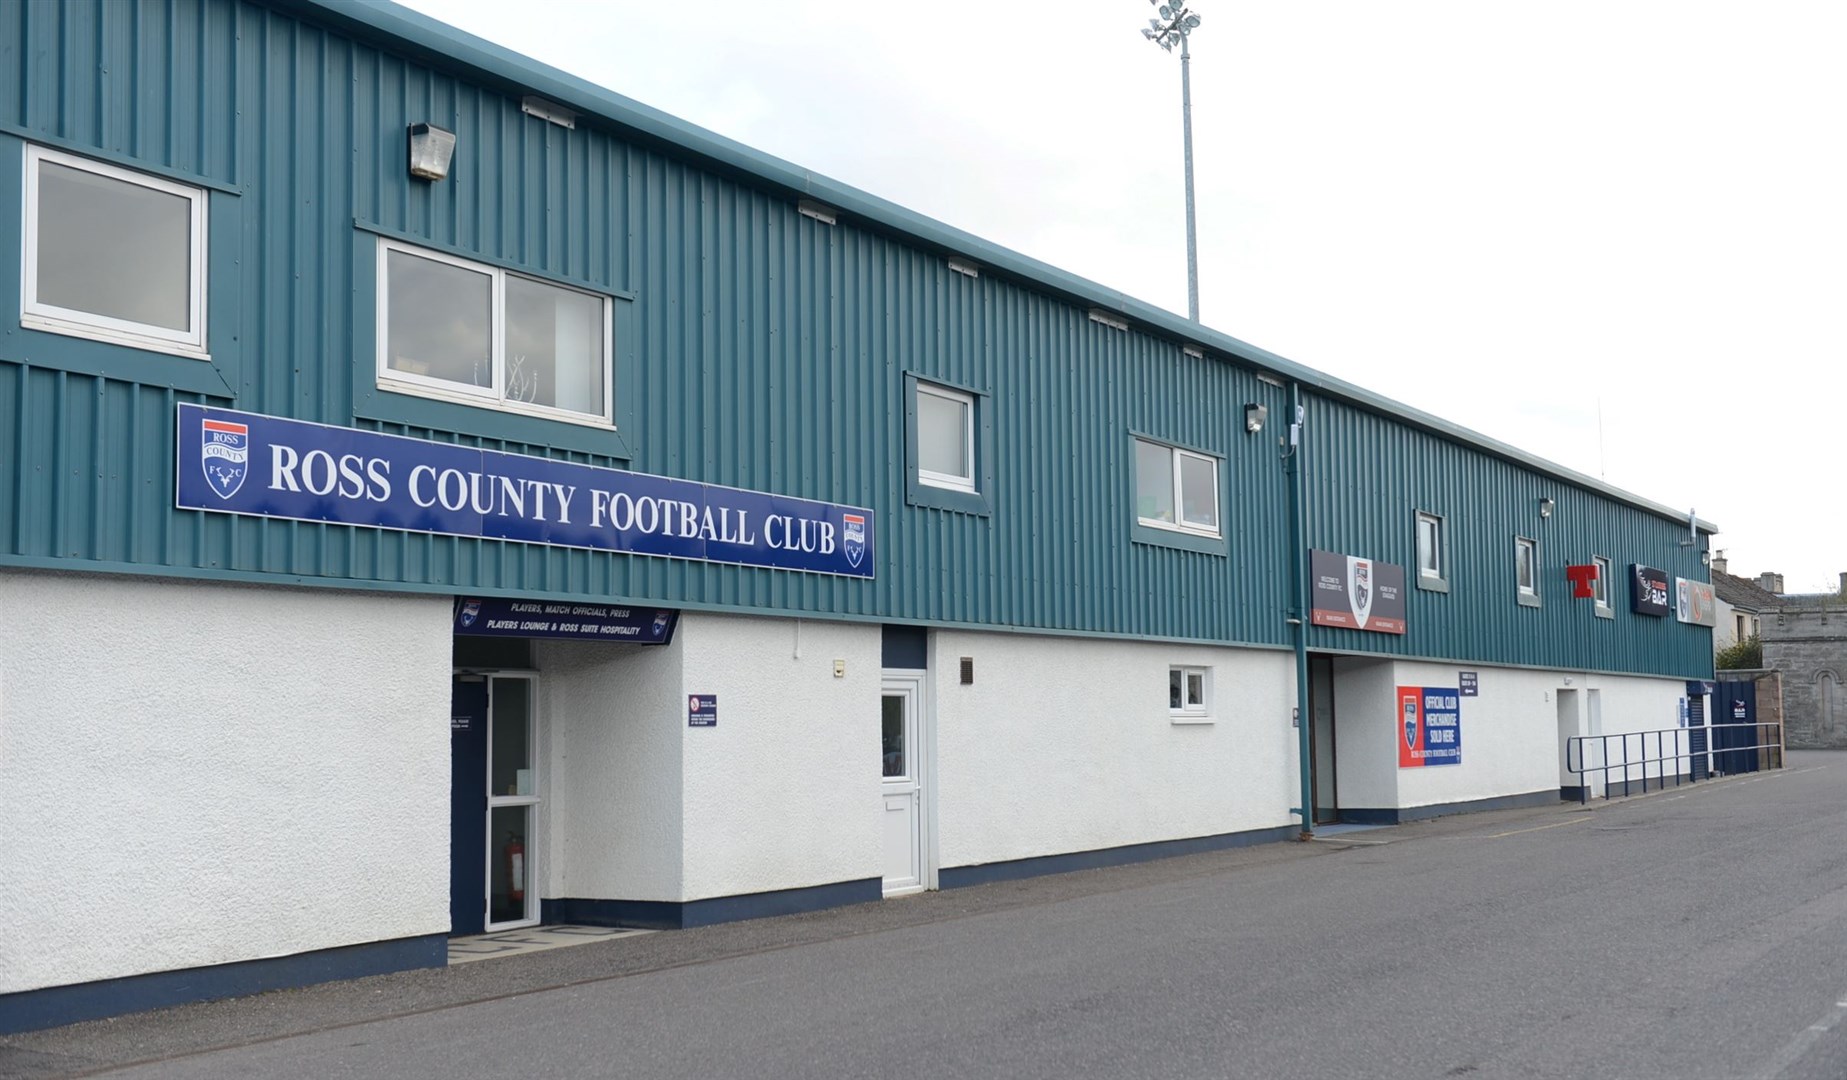 Ross County have written off a loss of £579,472 for the financial year ending May 31, 2023.